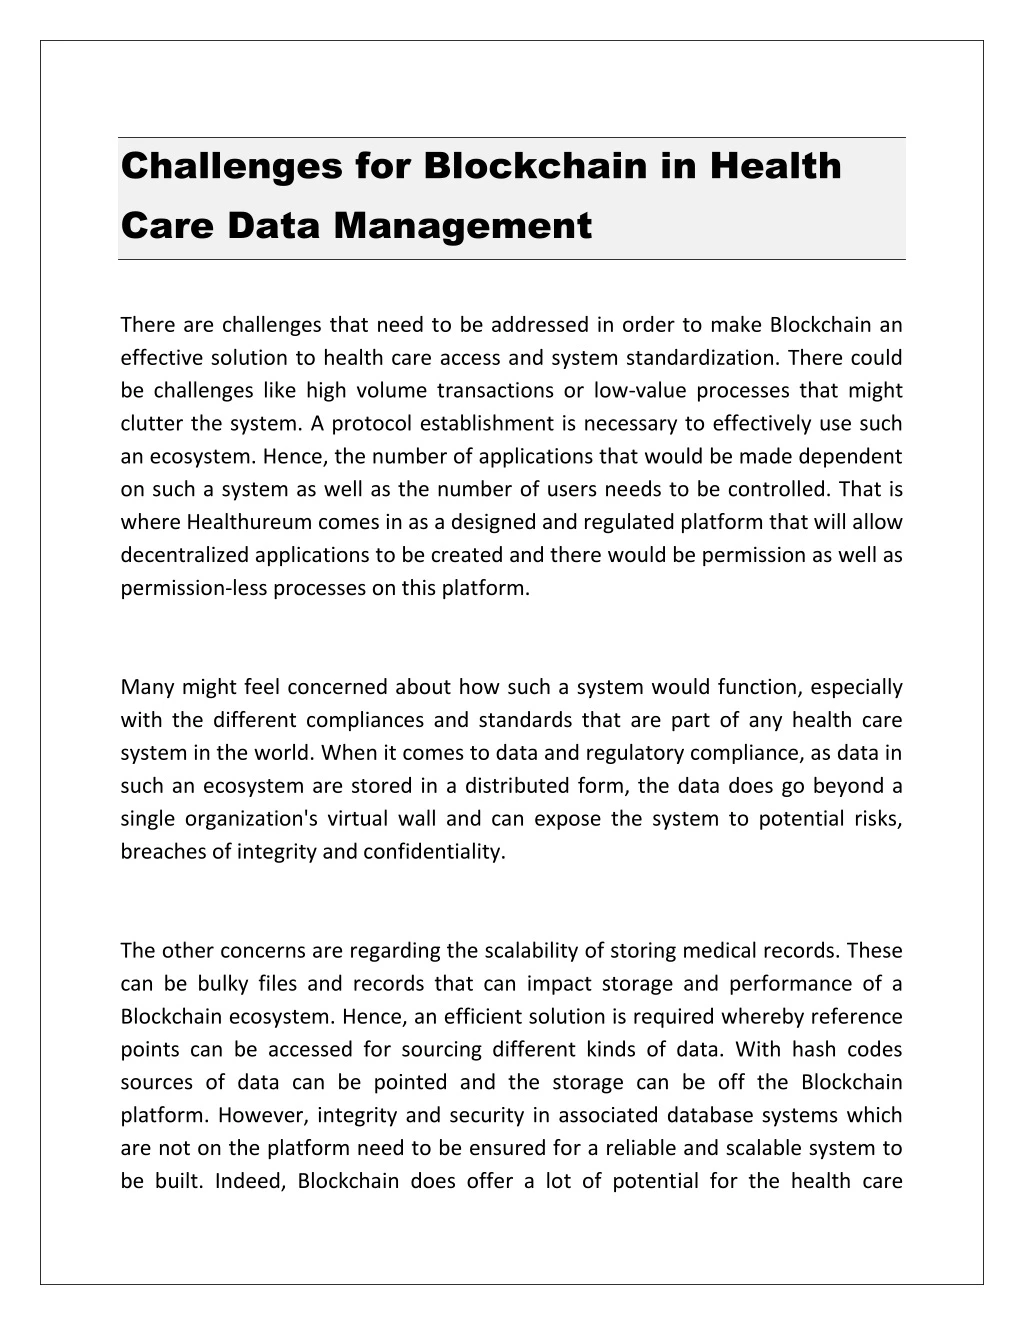 challenges for blockchain in health care data